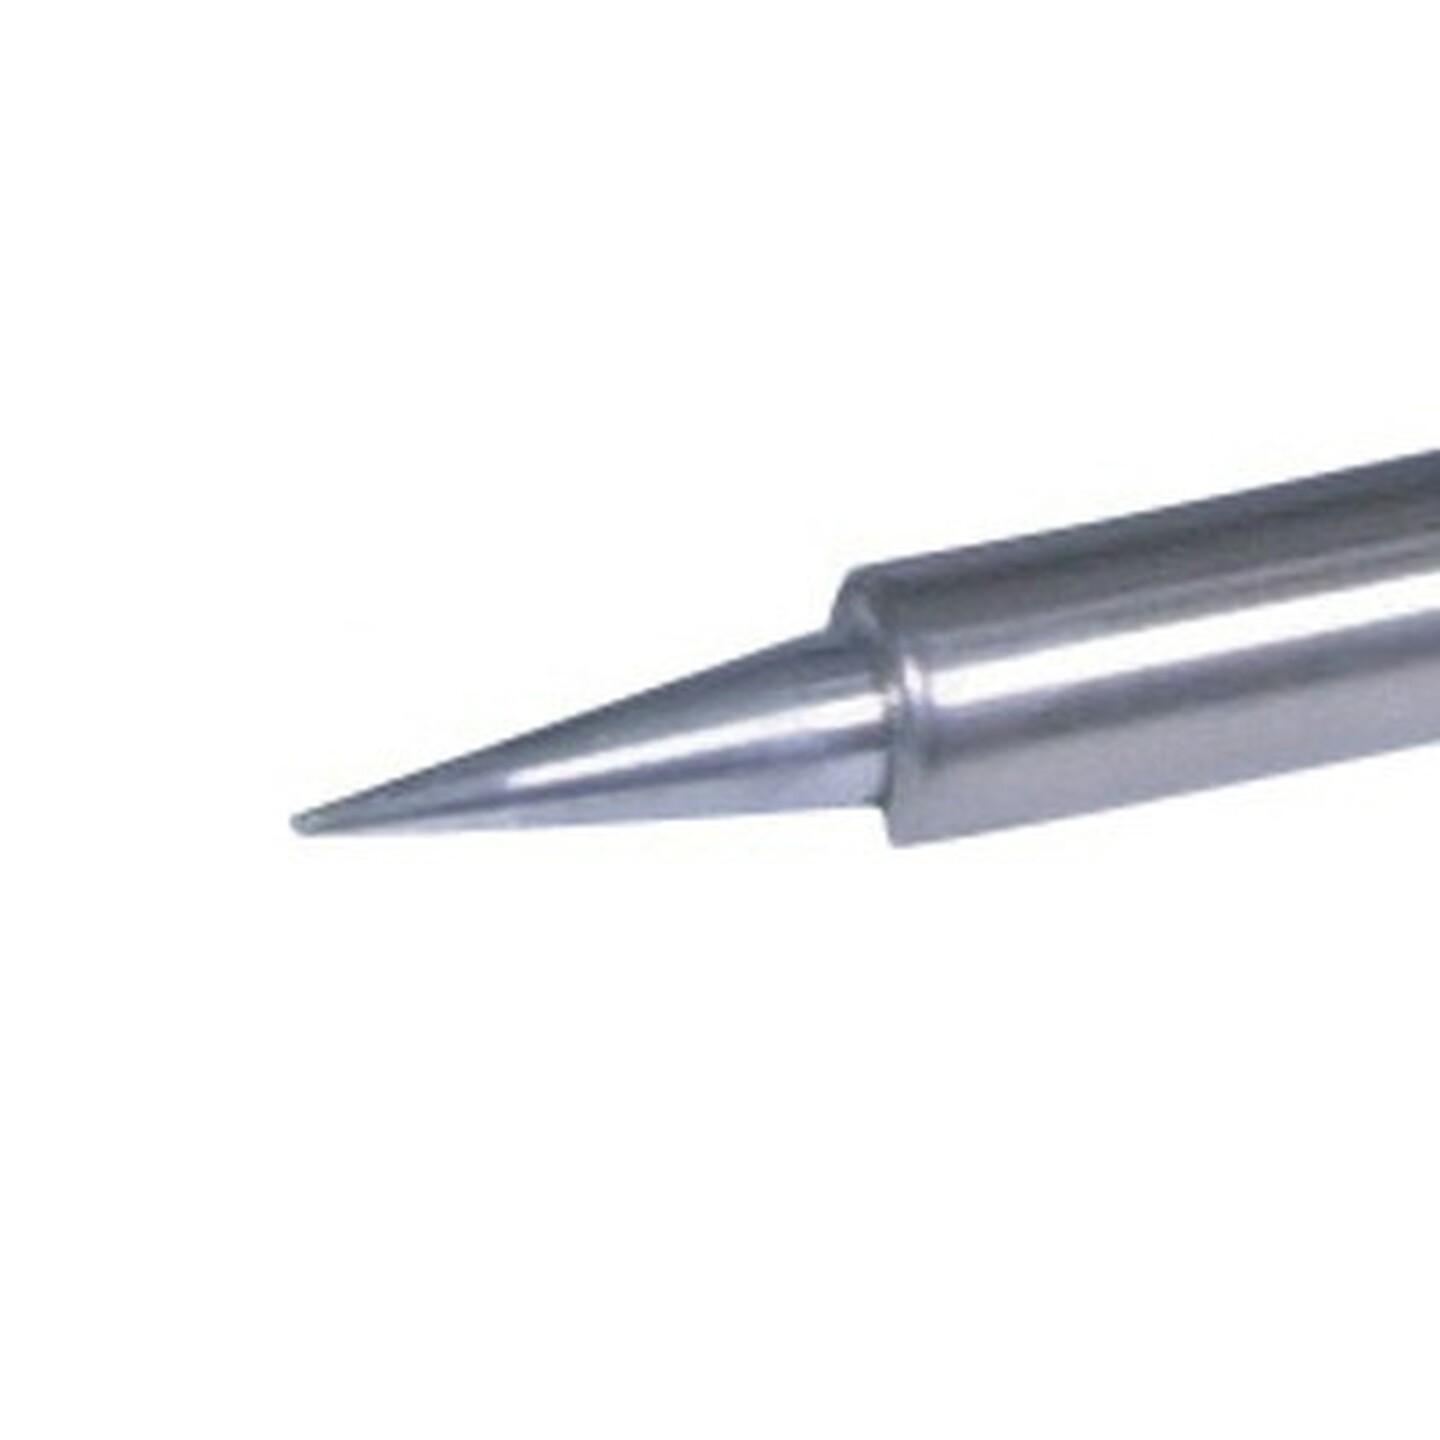 0.5mm Tip to suit TS1440 and TS1446